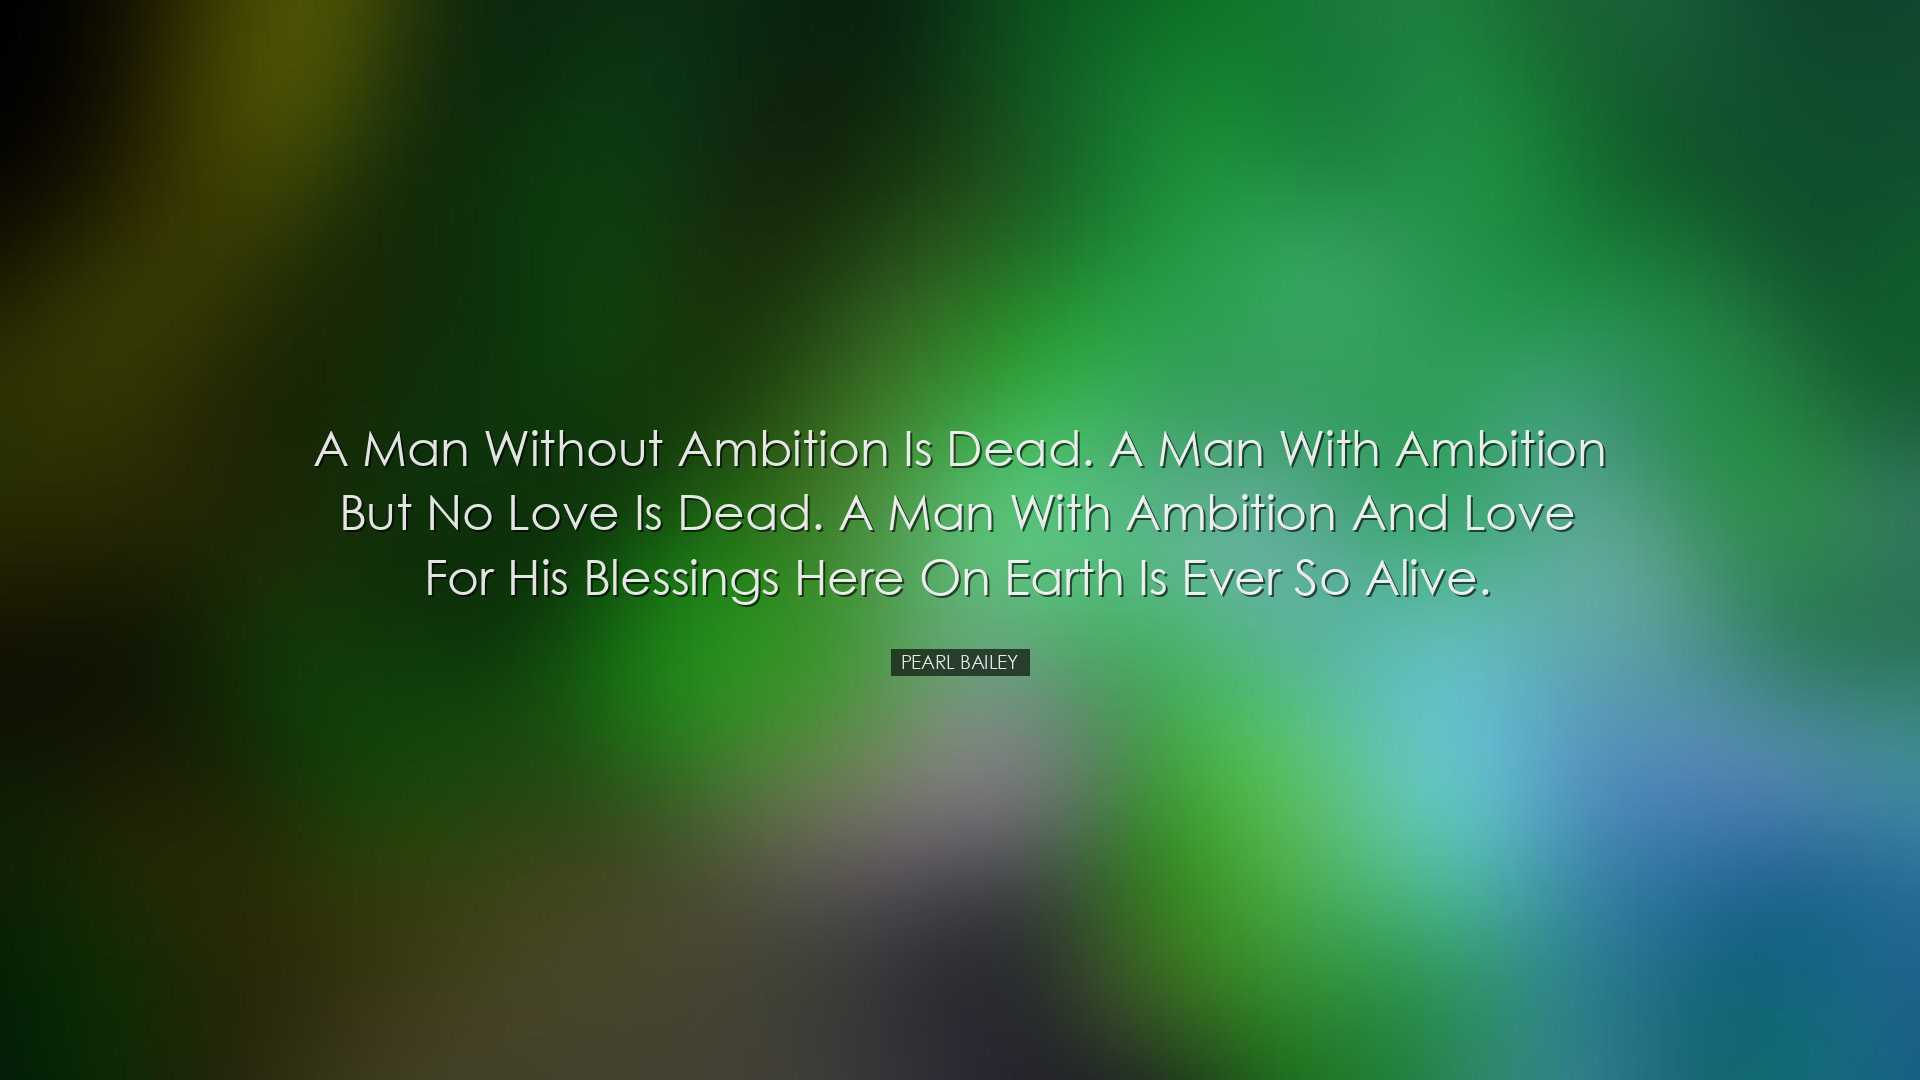 A man without ambition is dead. A man with ambition but no love is